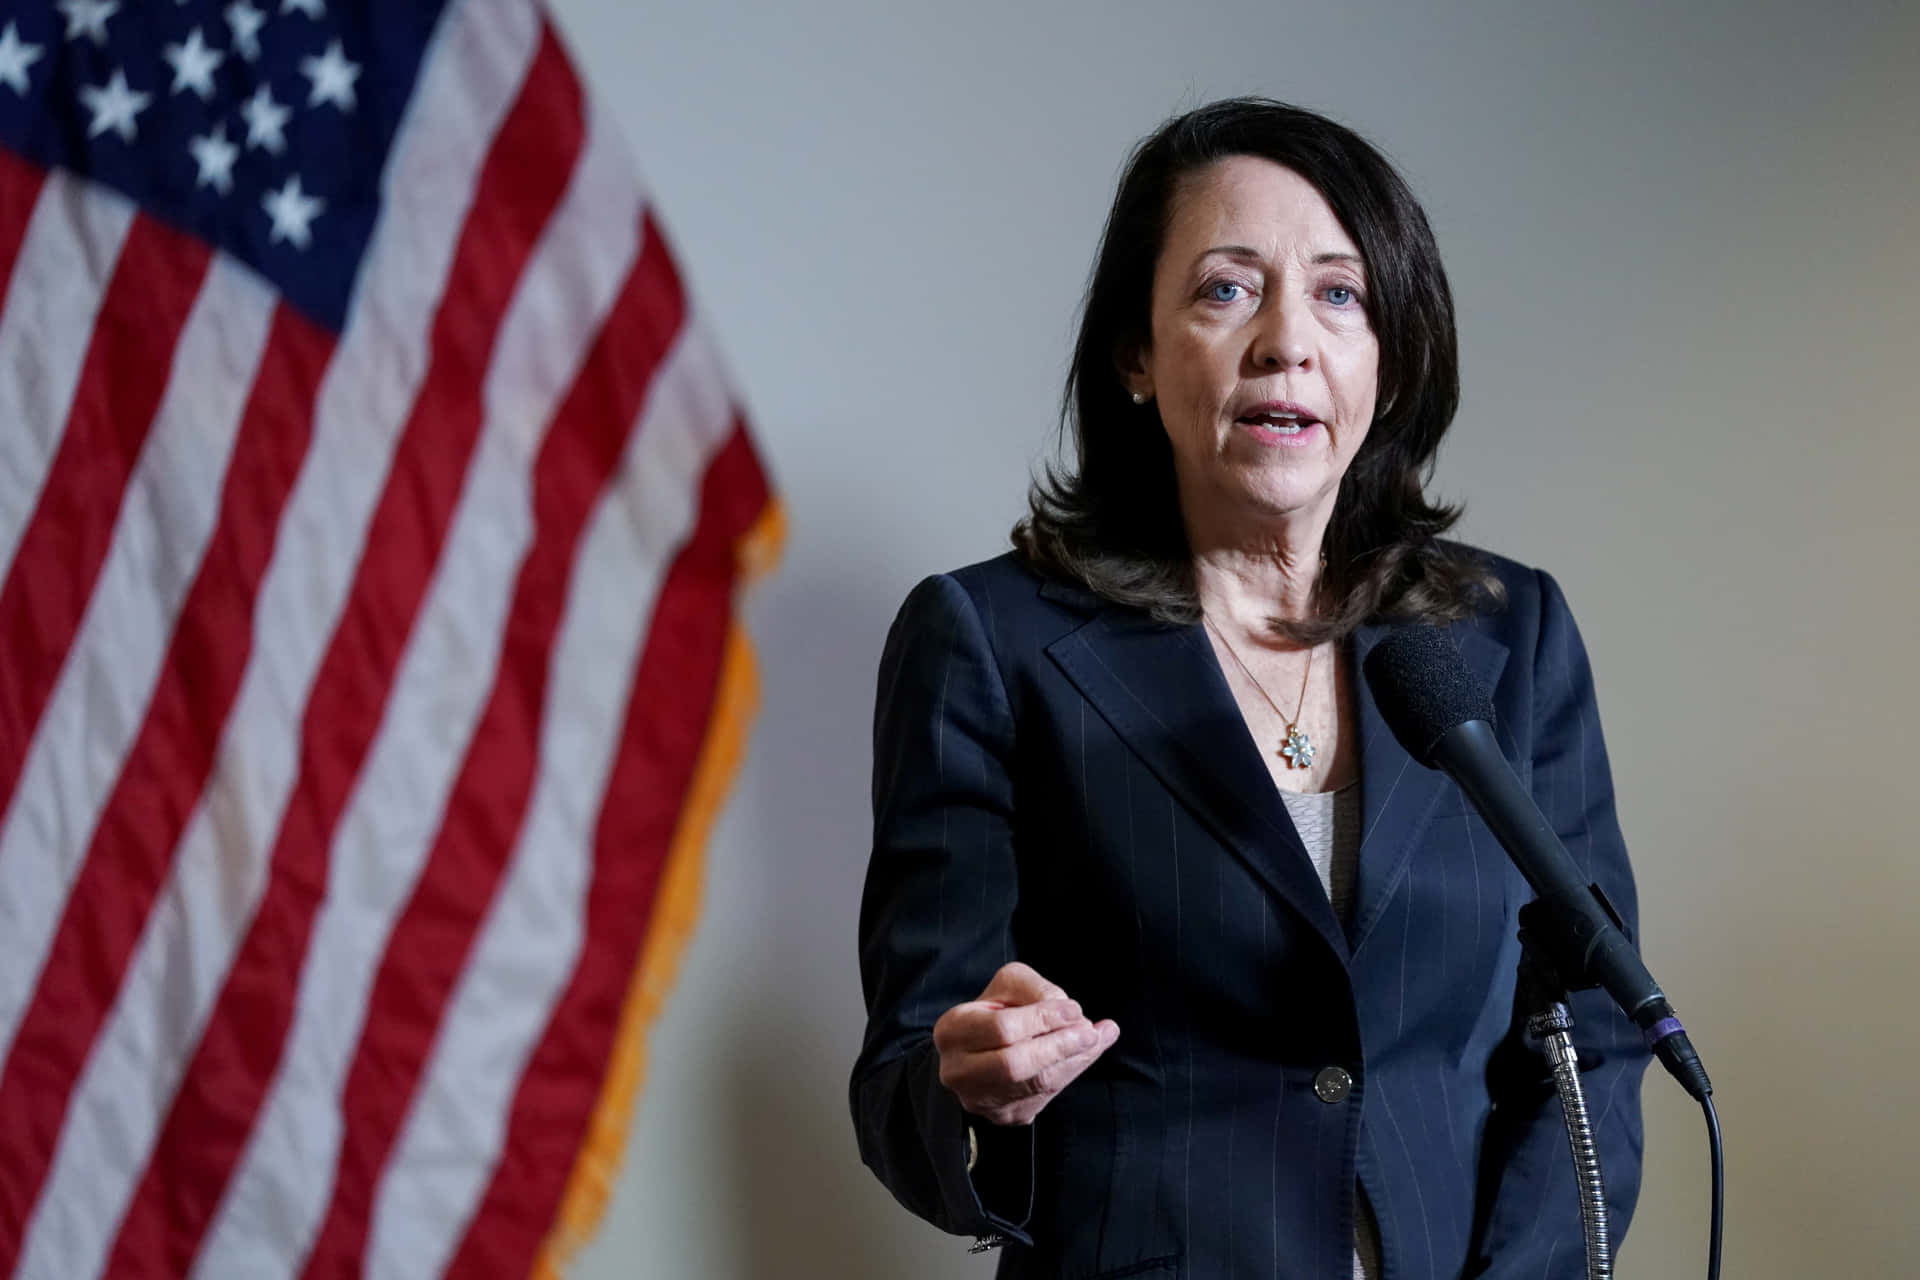 Senator Maria Cantwell pays respect to America’s Flag Wallpaper